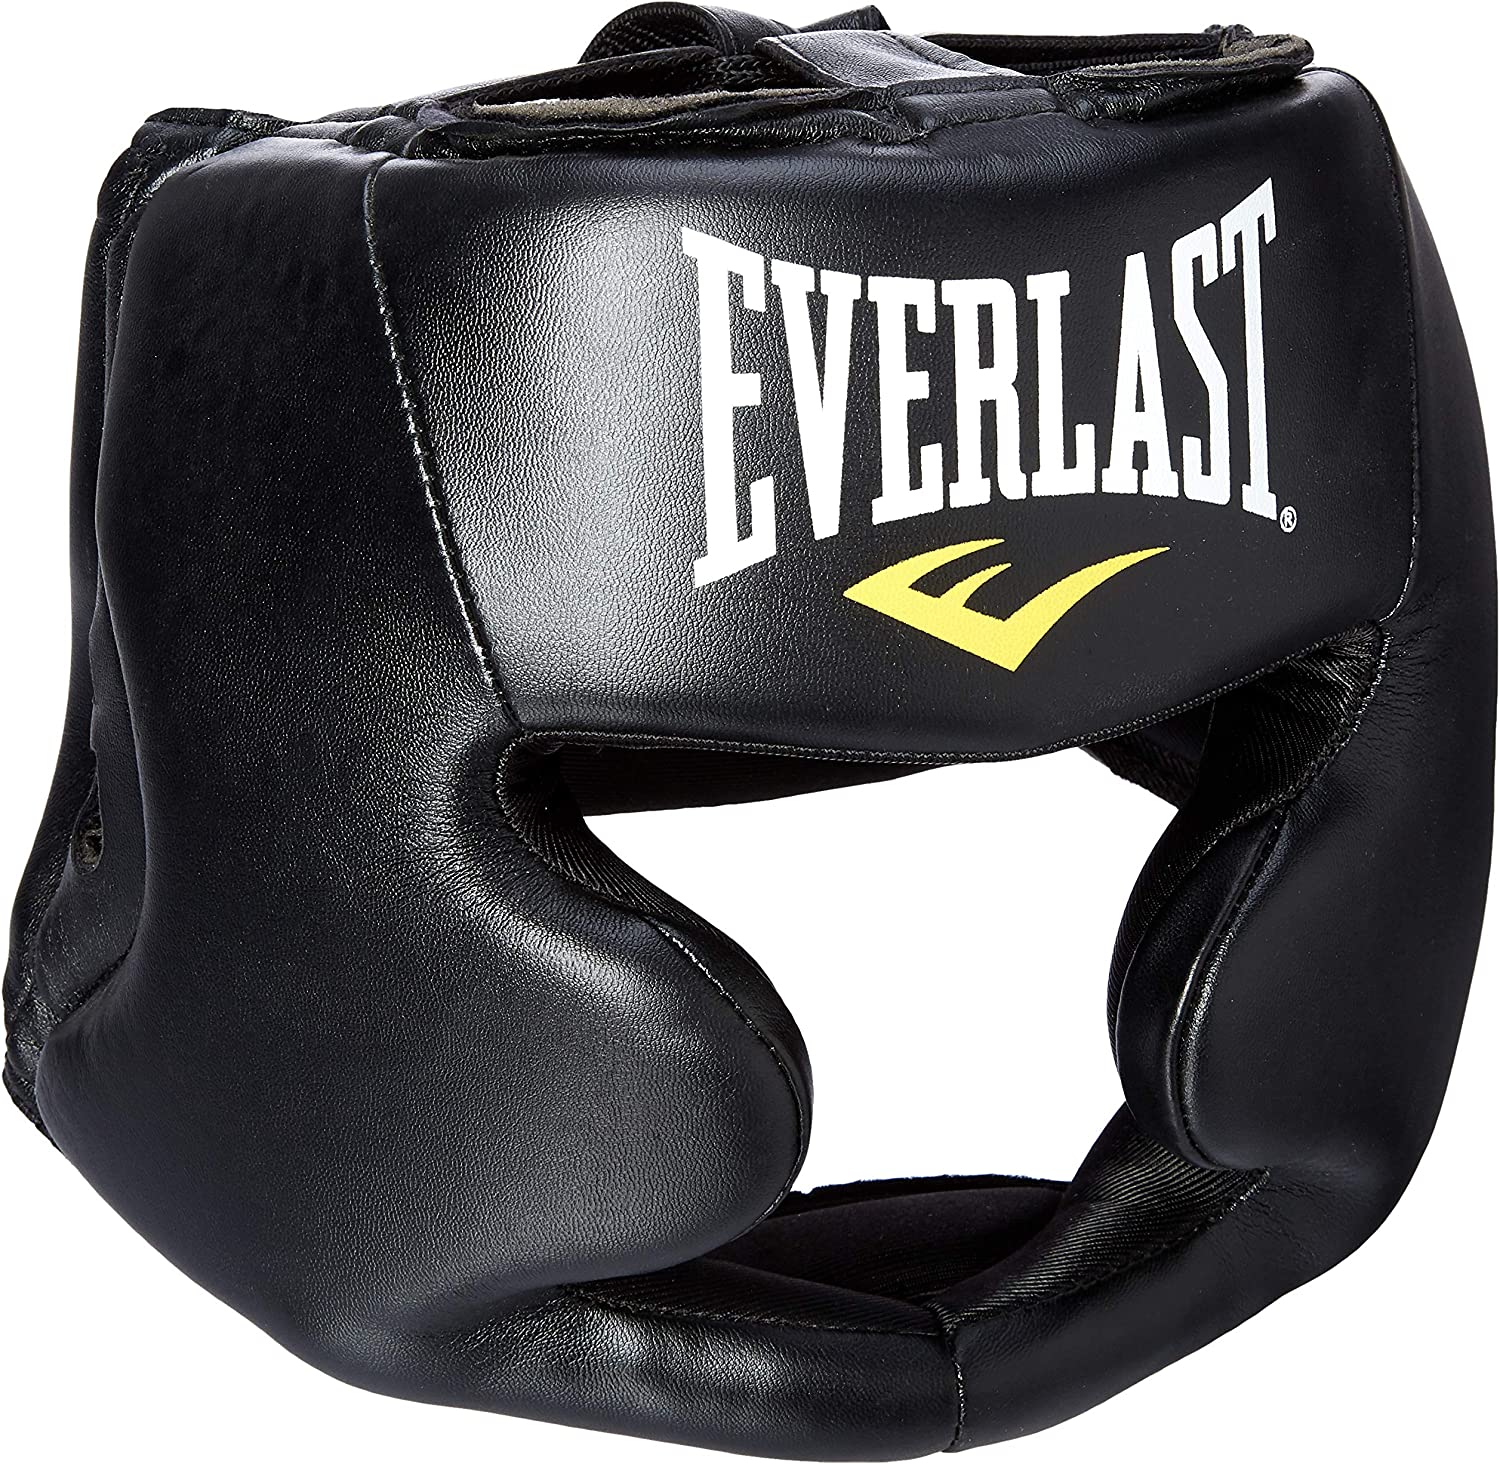 Best Kickboxing headgear designed for the best protection, comfort, and durability during intense training sessions. This good headgear, known for being great Everlast kickboxing headgear, is suitable for Kickboxing enthusiasts, ensuring visibility and providing a secure fit. It is among the top choices for Kickboxing gear and helmet.